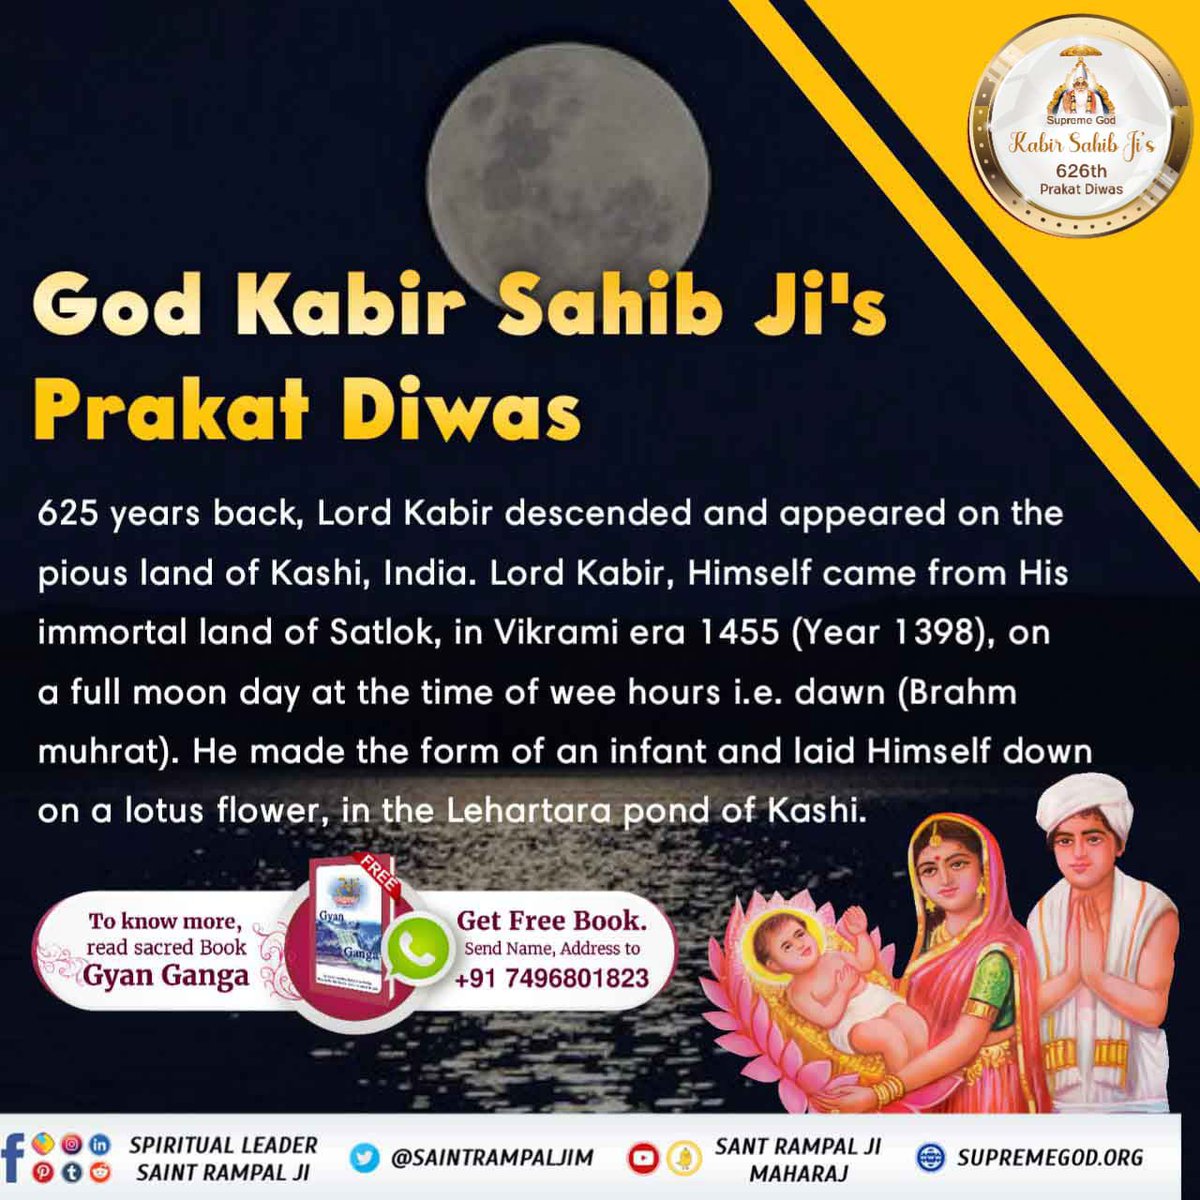 #626वां_कबीरसाहेब_प्रकटदिवस
On the full moon day of the Hindu month Jyeshtha Shuddhi in 1398 A.D. , God Kabir appeared in the form of a newborn child (infant) on a lotus flower in Kashi.